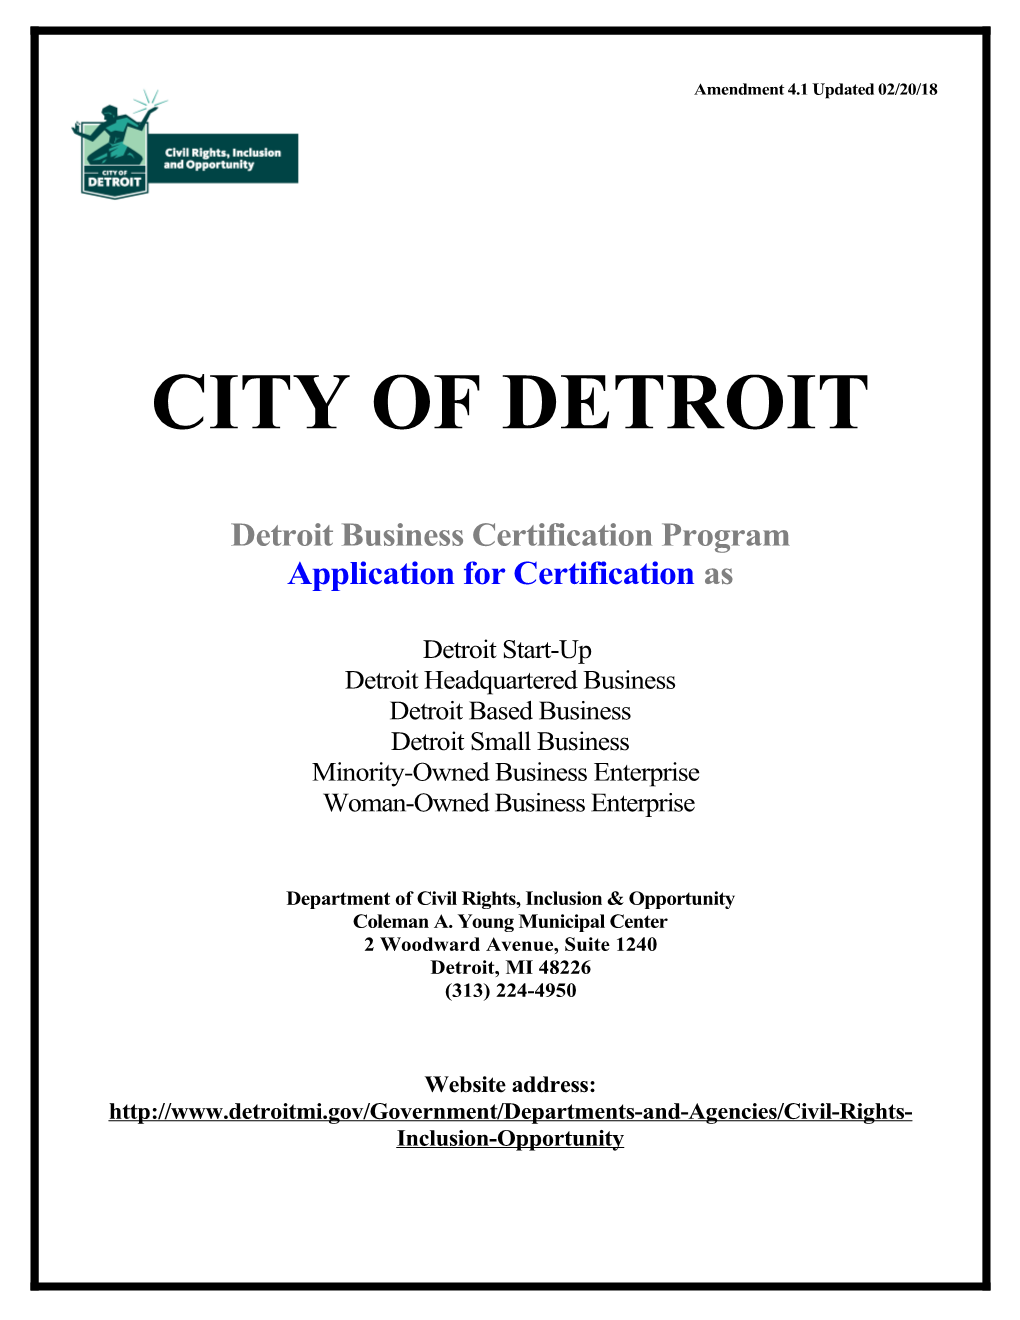 City of Detroit /Civil Rights, Inclusion & Opportunity